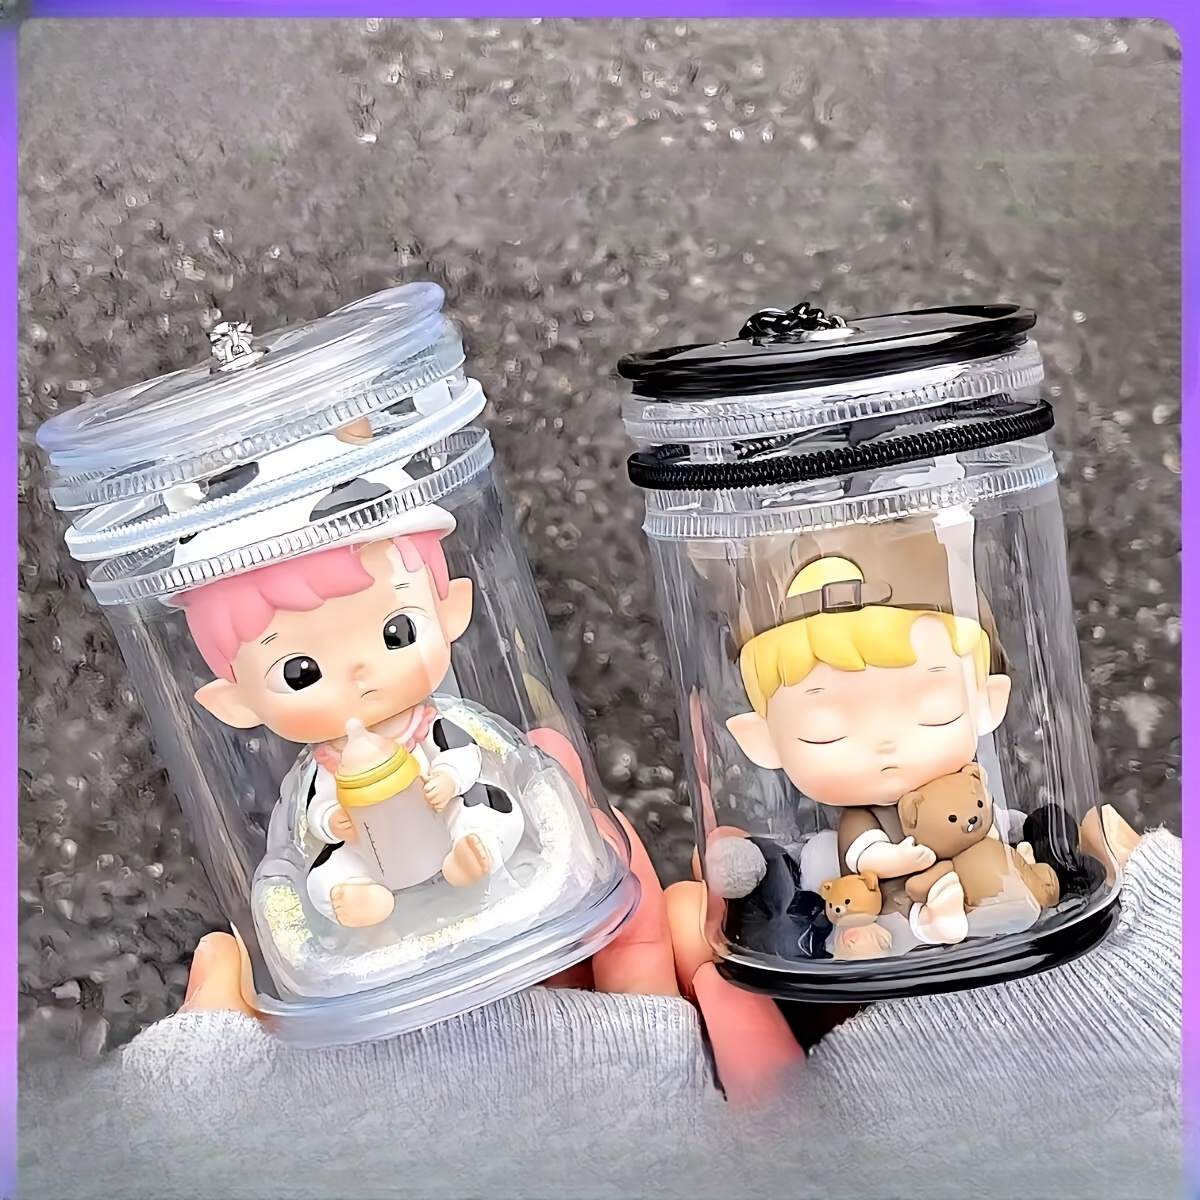 

Fashion Transparent Mini Storage Bag Keychain With Cute Theme Doll For Female Students Gifts